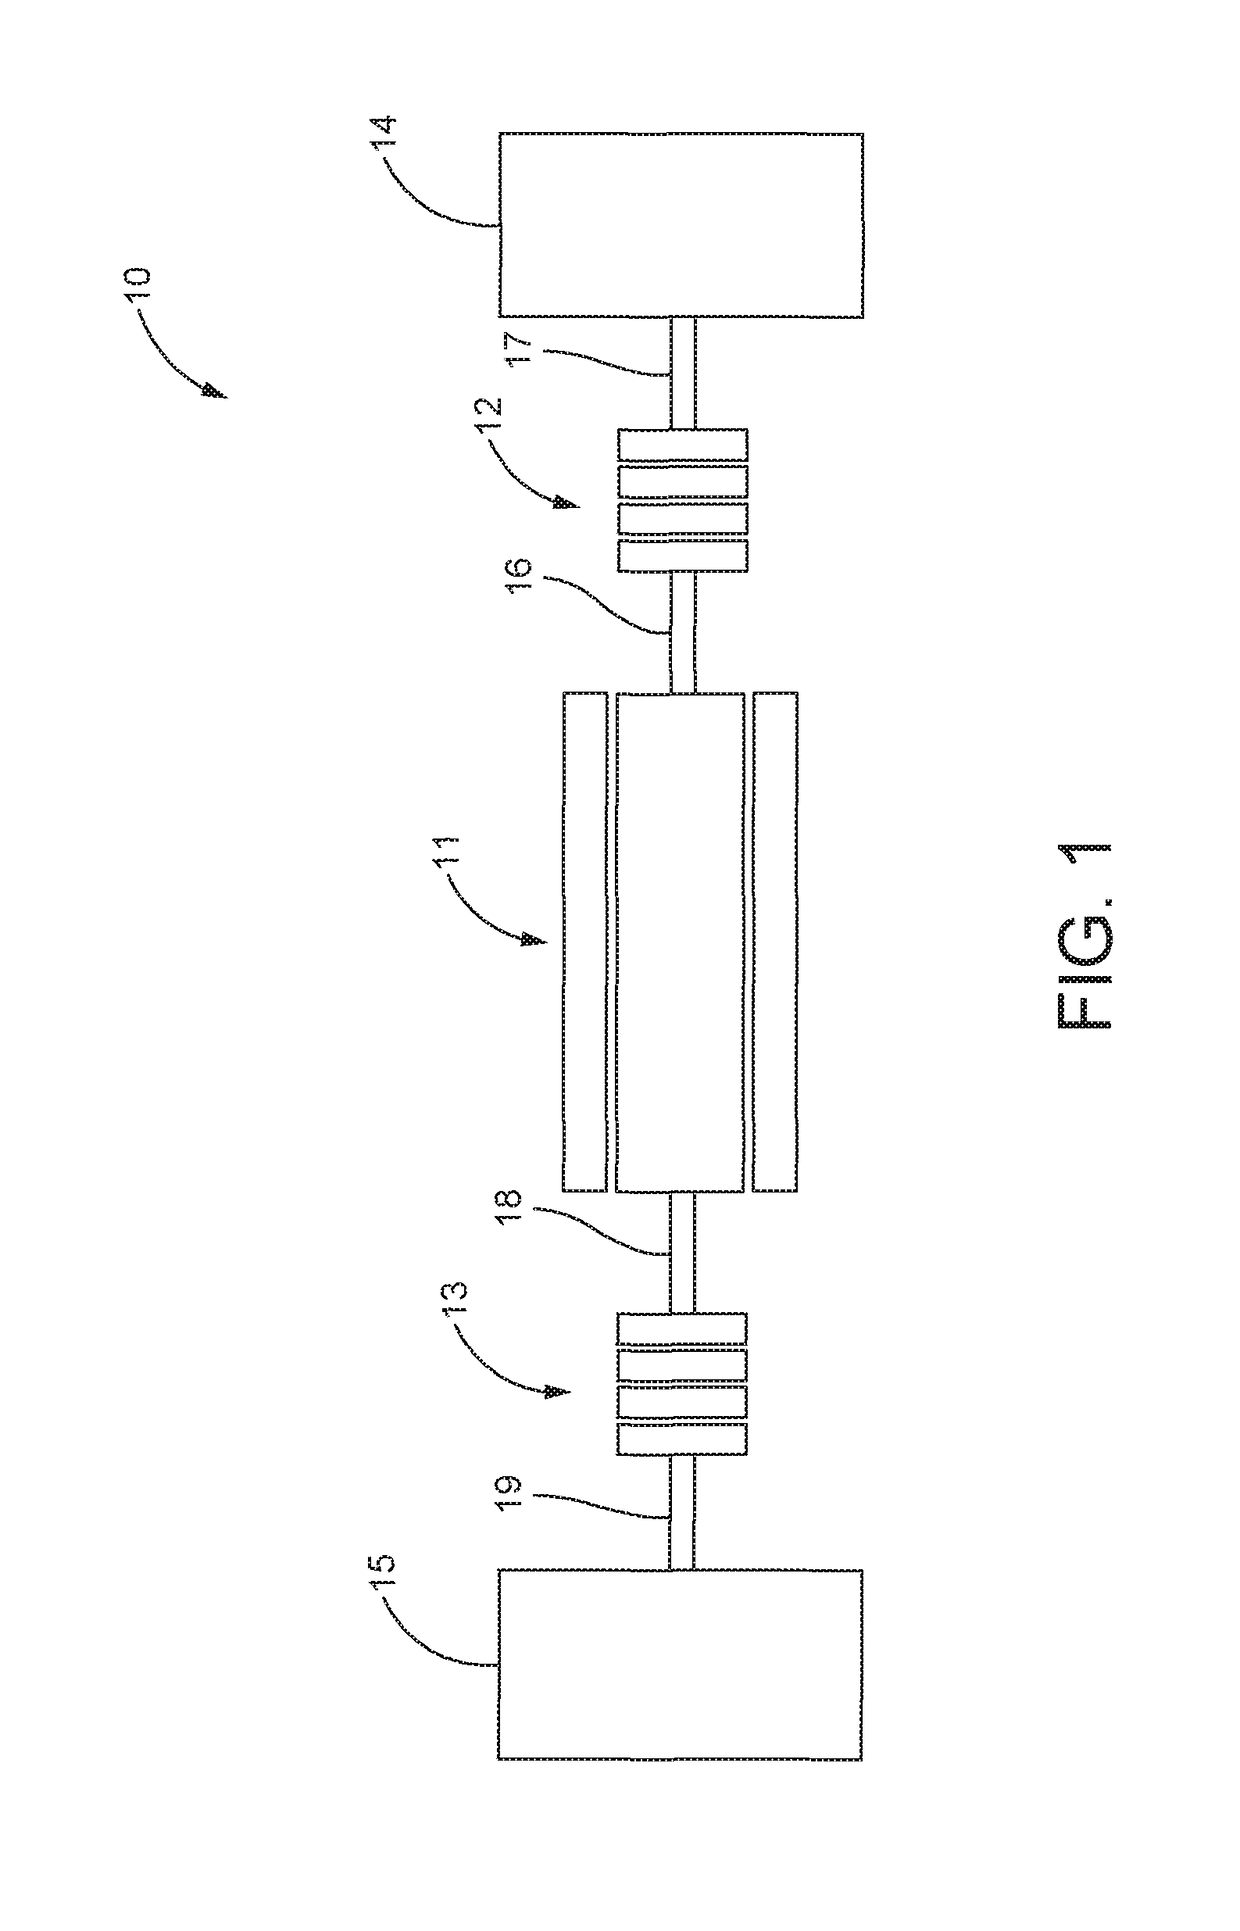 Electric motor with coaxial clutch packs that provide differential and torque vectoring